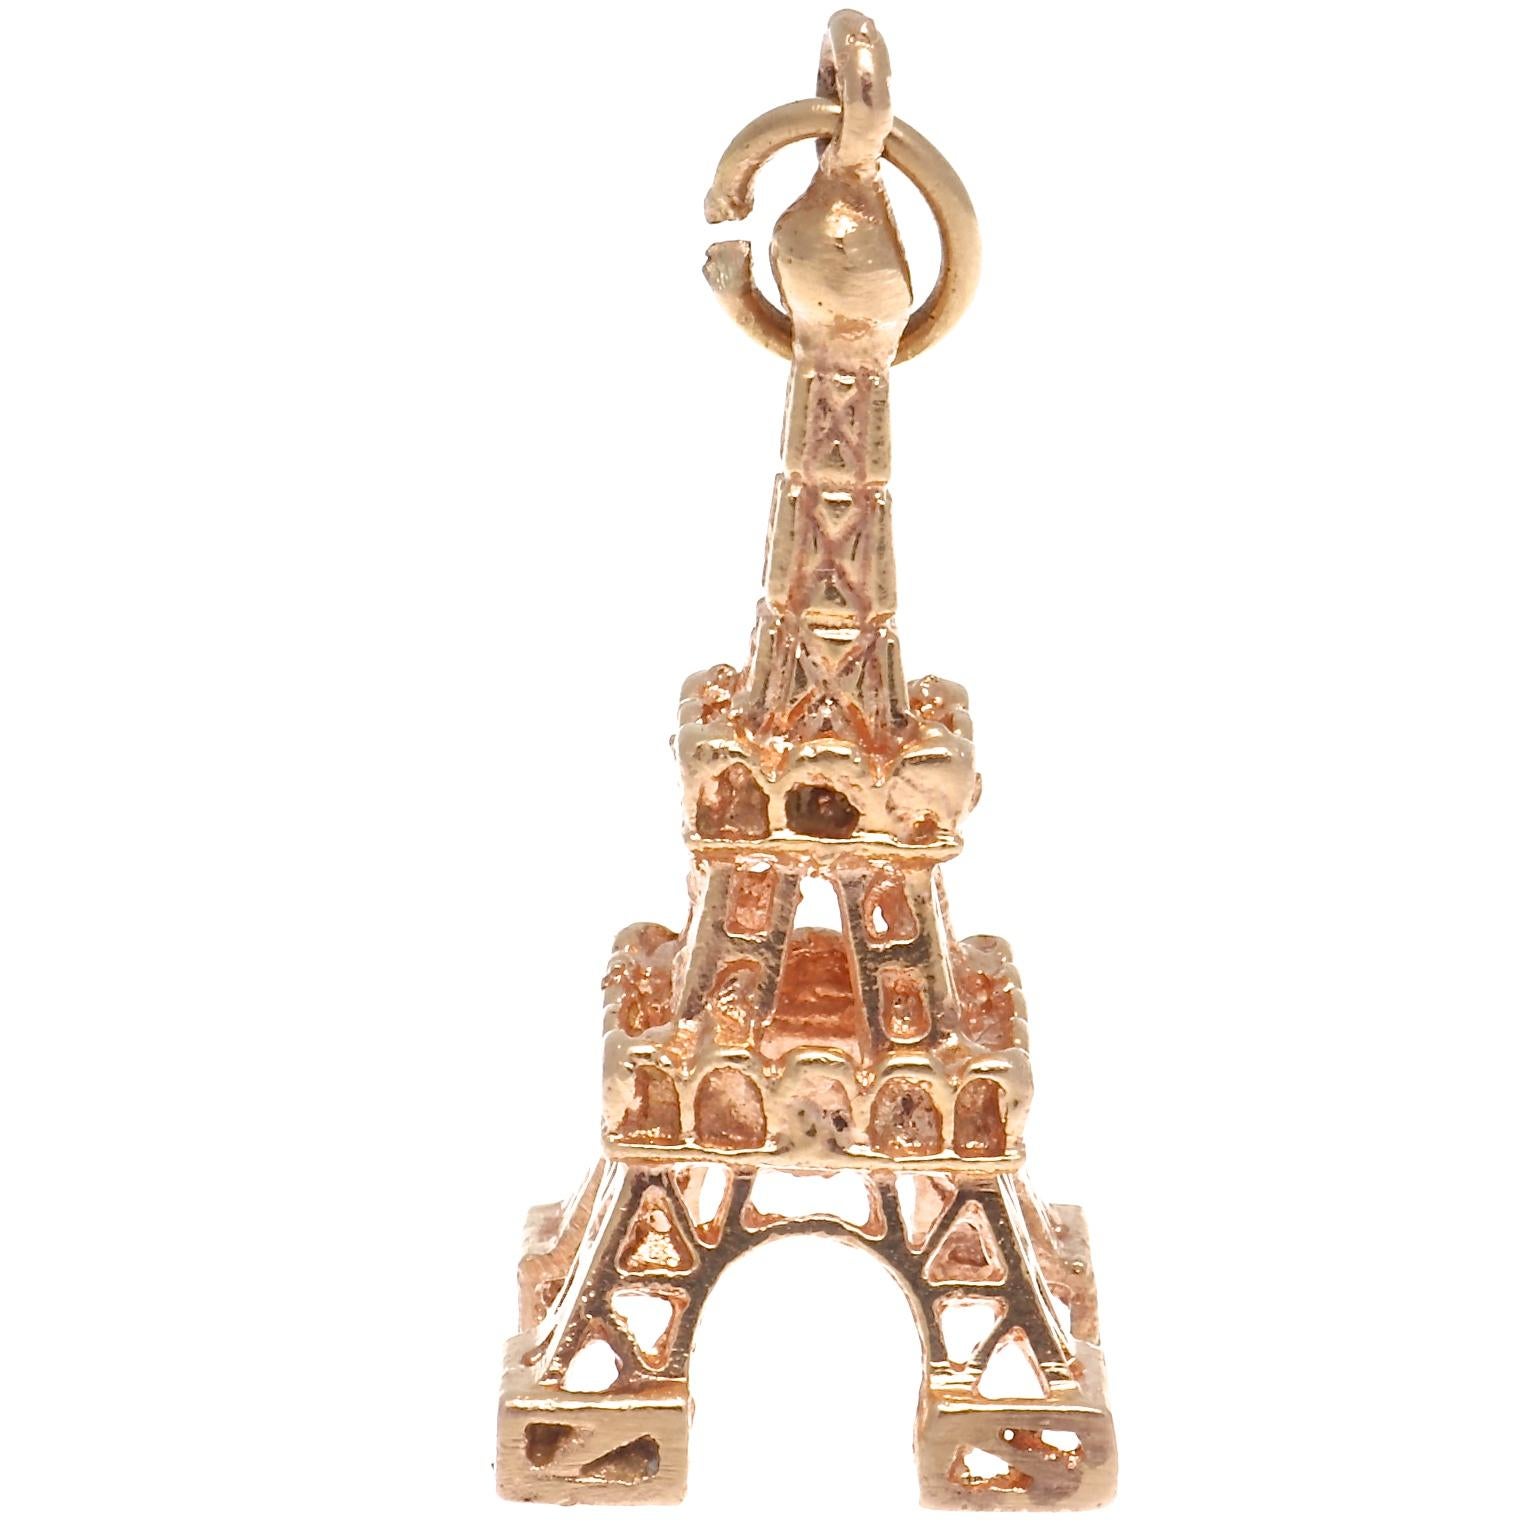 Buy one or all of these delightful vintage 18K gold charms. 
1960s vintage 18k Gold Eiffel Tower Charm. 4.6 grams. 1-1/8 inches x 1/2 inch. 18k $950
1950s vintage 18k Gold Car Charm. 7.4 grams. 1 inch x 1/2 inch. 18K. $1000
1950s vintage 18k Gold